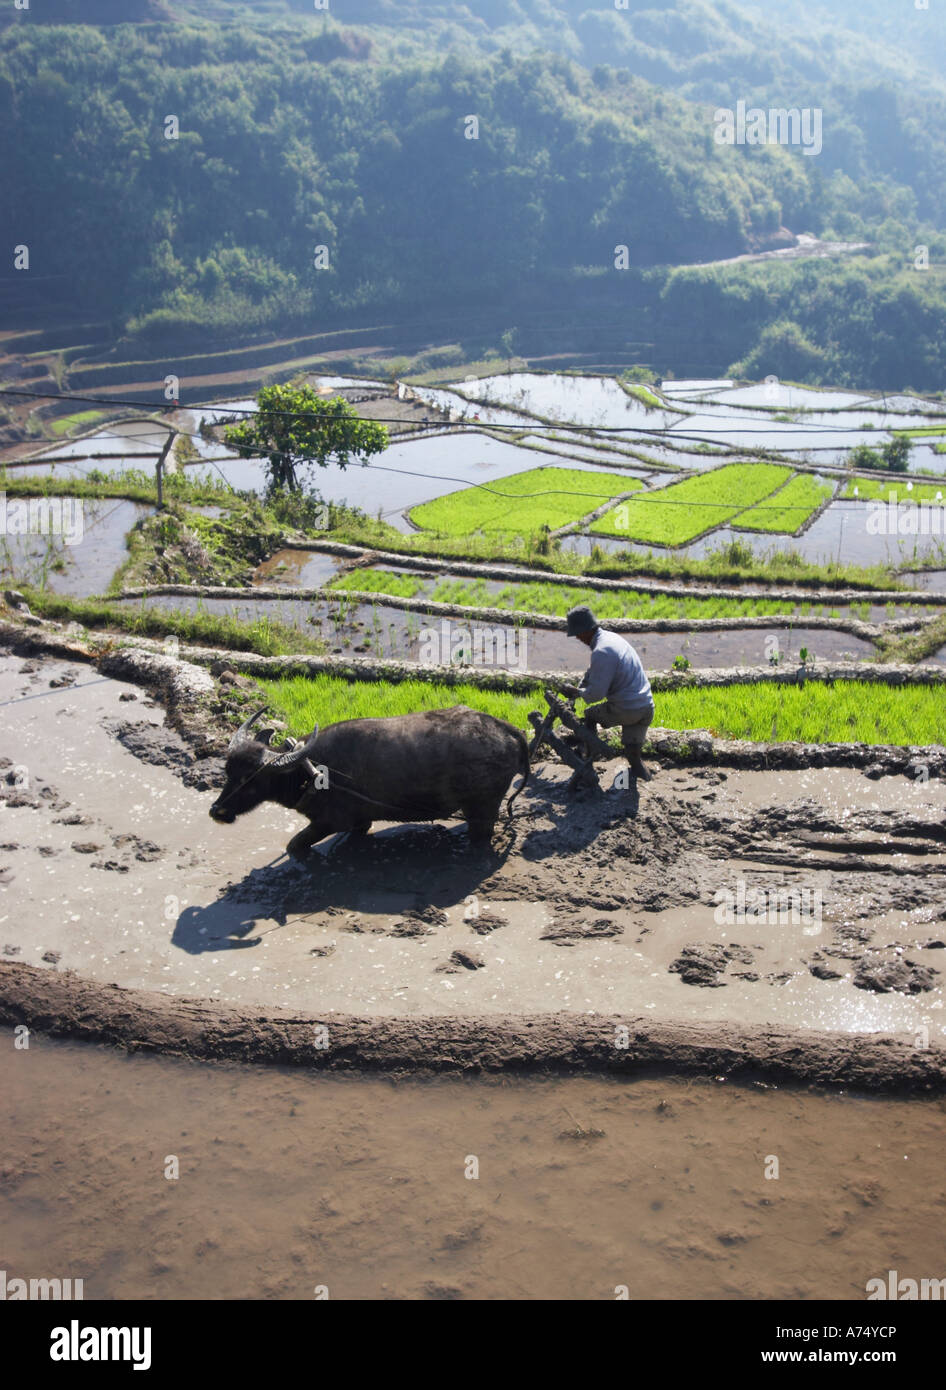 Man Using Ox To Plough Rice Terrace Stock Photo